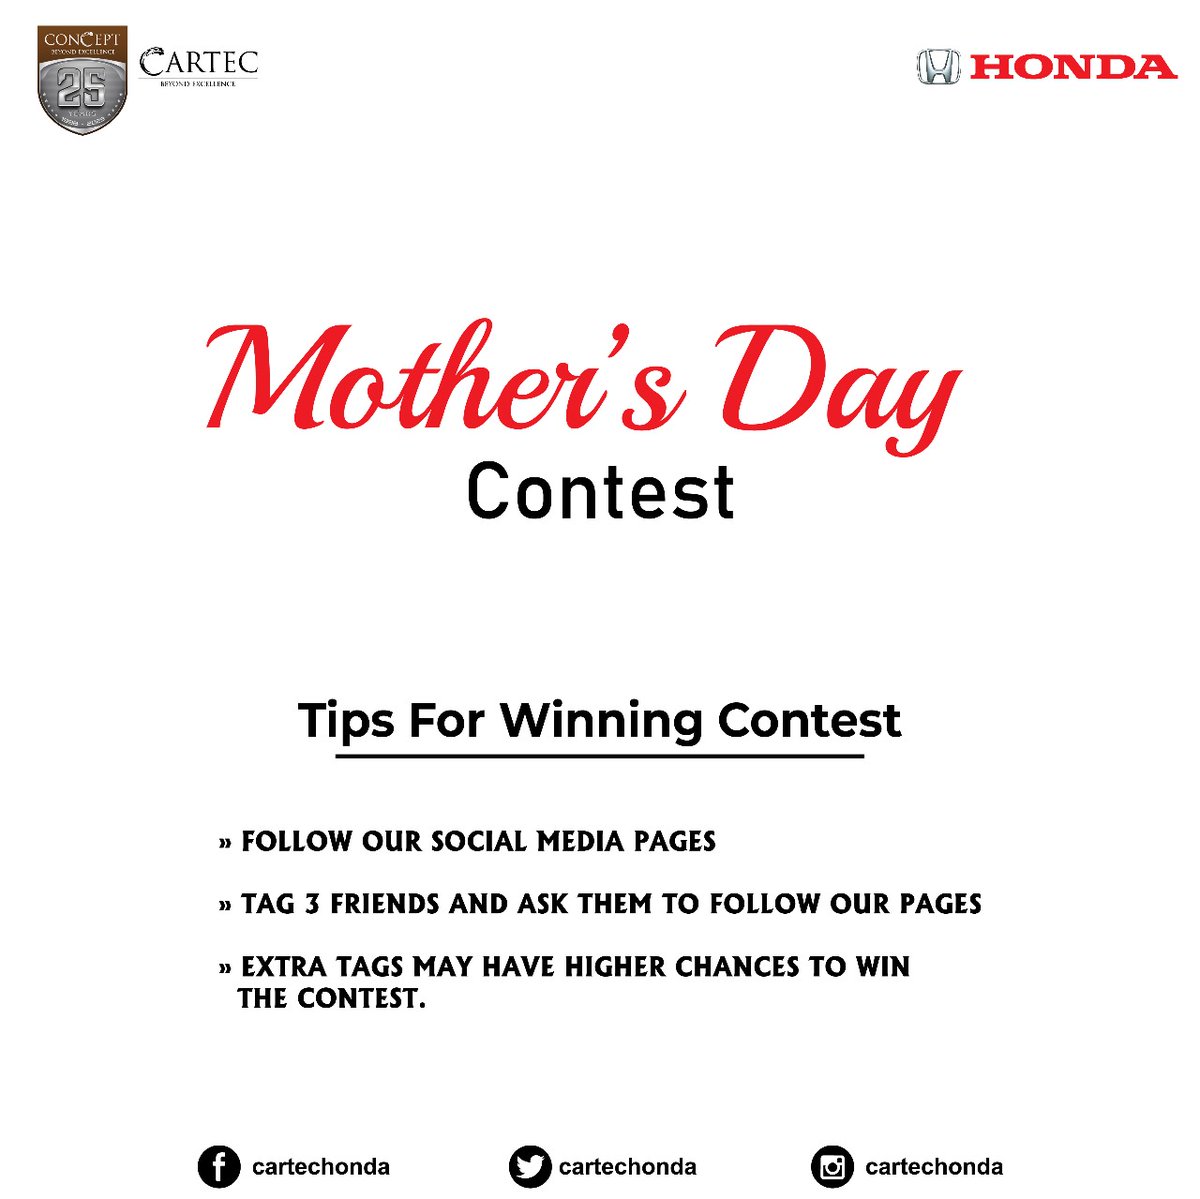 𝐌𝐨𝐭𝐡𝐞𝐫'𝐬 𝐃𝐚𝐲 𝐂𝐨𝐧𝐭𝐞𝐬𝐭
Participate and prove to us that you are a true Honda fan! Stand a chance to win exciting prizes.

Please read the rules of the Quiz contest

#CartecHonda #ConceptGroup #QuizAlert #Contest #ContestAlert #Giveaway #quiztime #termsandcondition